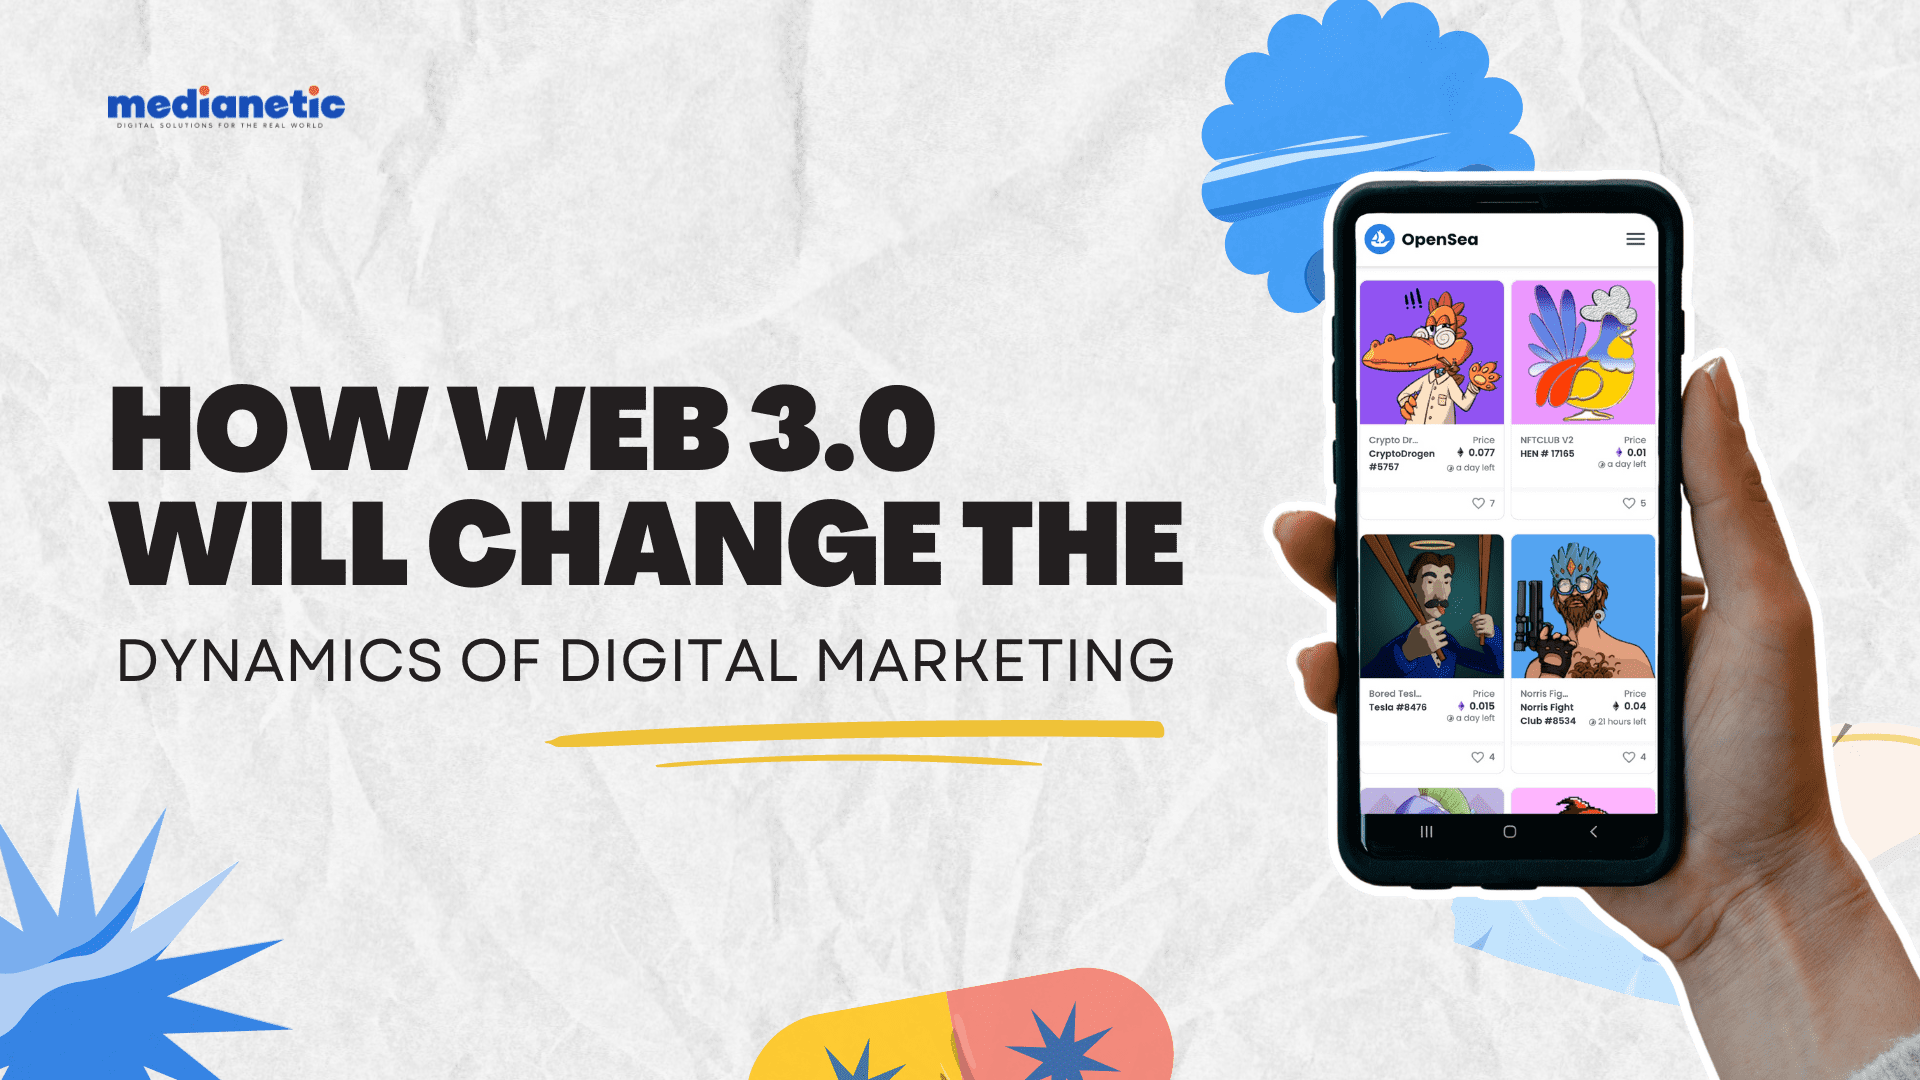 How Web 3.0 Will Change the Dynamics of Digital Marketing